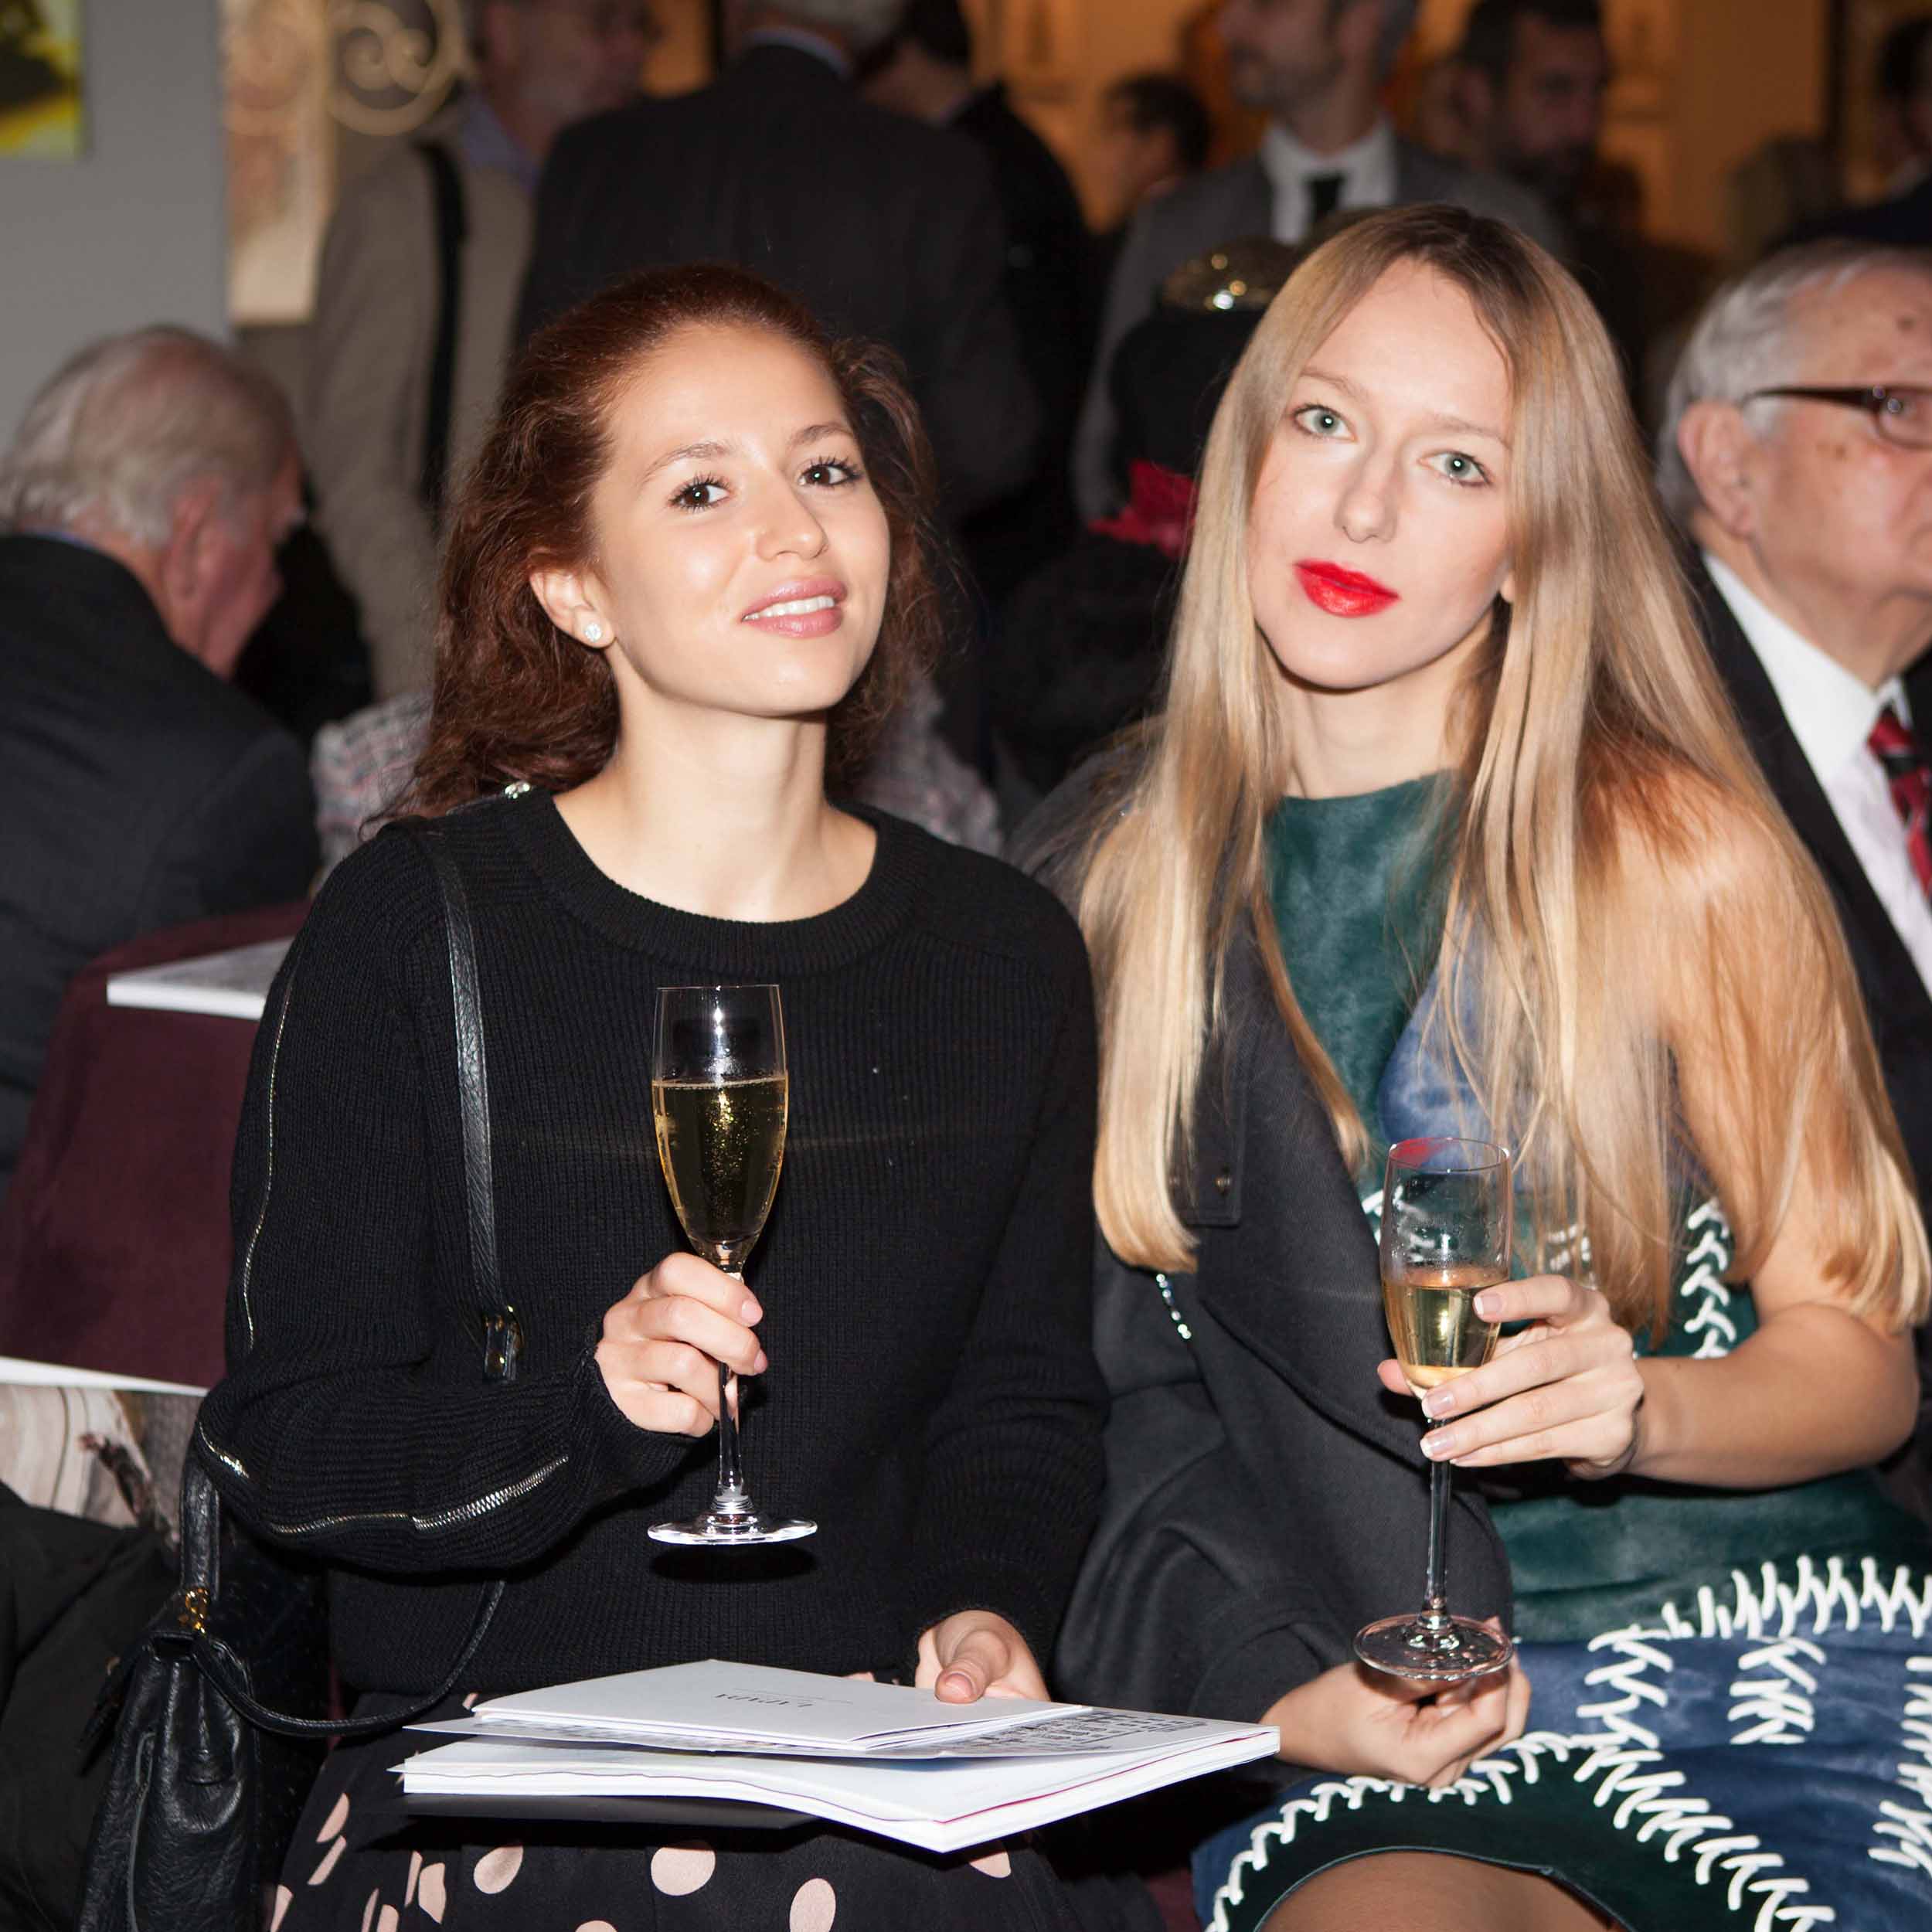 BE A JEWELLERY BLOGGER FOR AN EVENING, LAPADA WITH KRISTINA HELLMICH, GEMOLOGUE WINNER